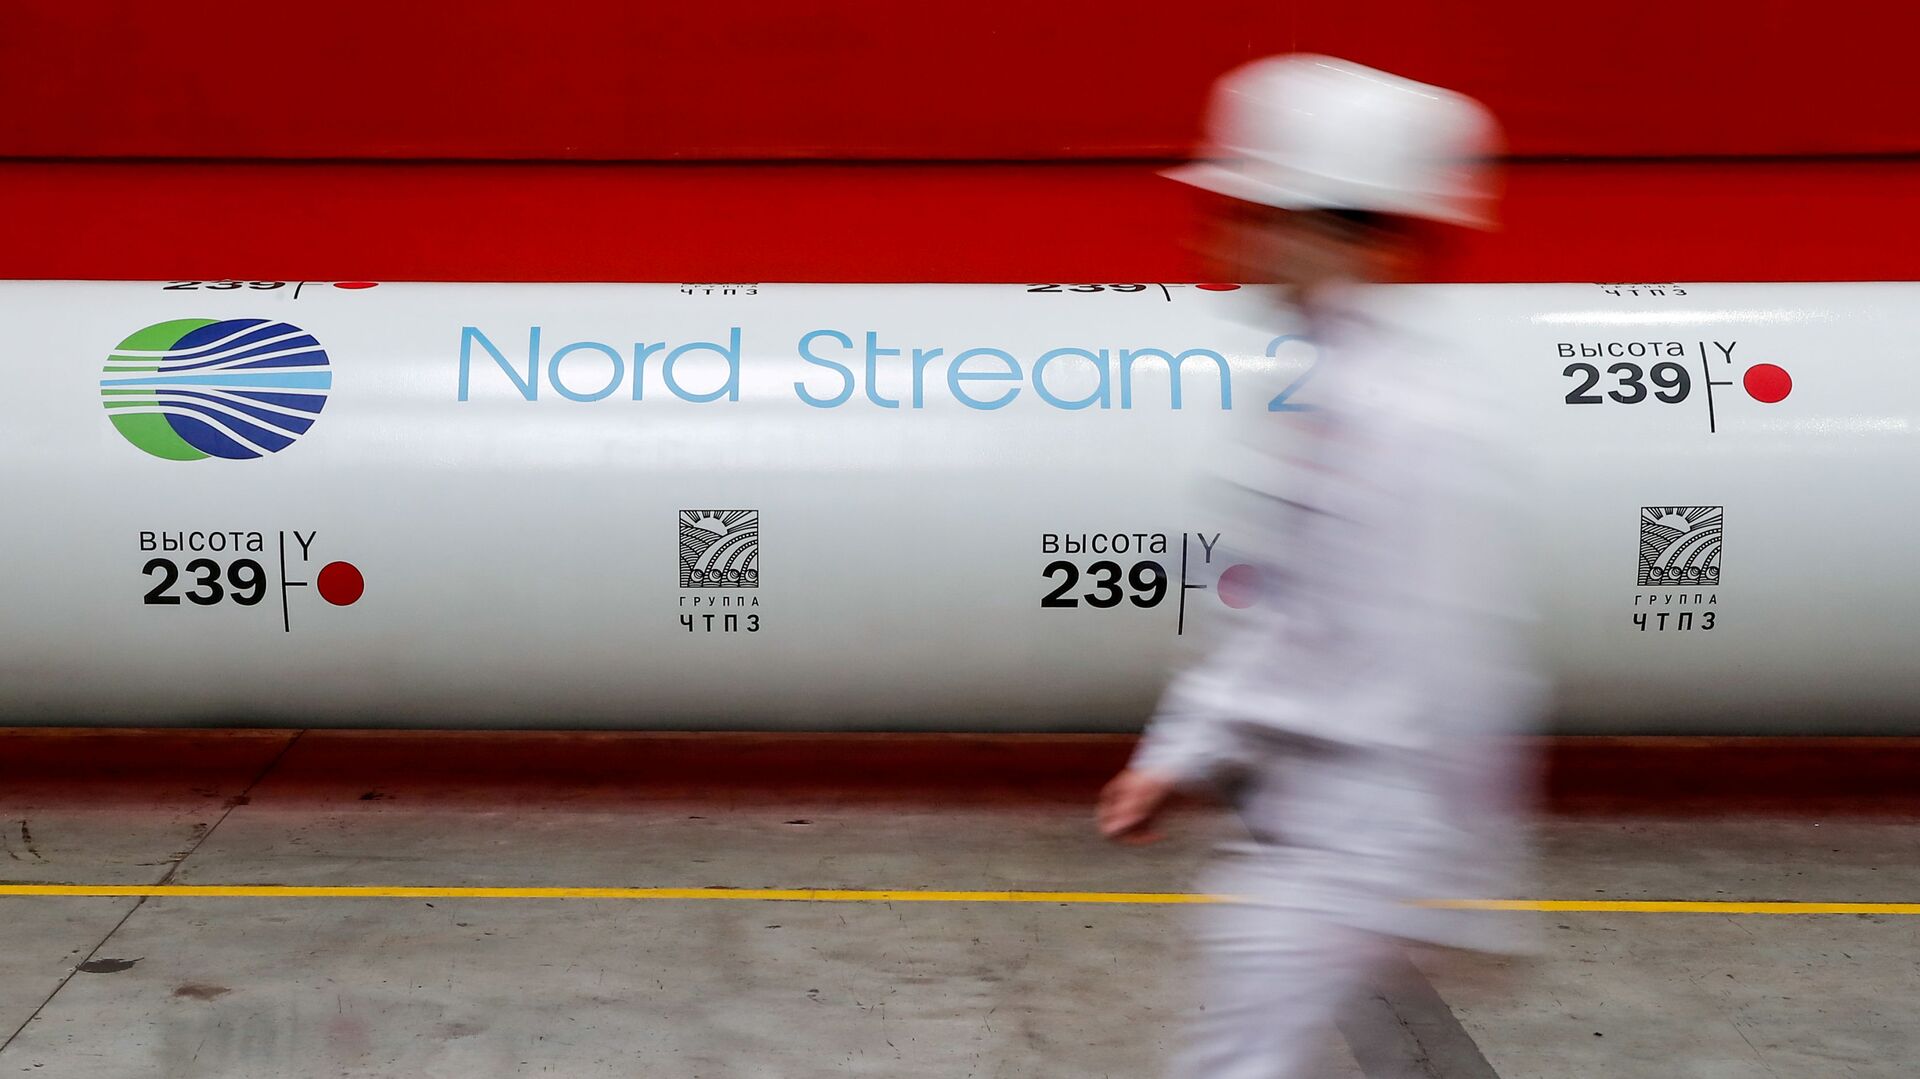 The logo of the Nord Stream 2 gas pipeline project is seen on a pipe at the Chelyabinsk pipe rolling plant in Chelyabinsk, Russia, 26 February 2020. - Sputnik International, 1920, 13.08.2021